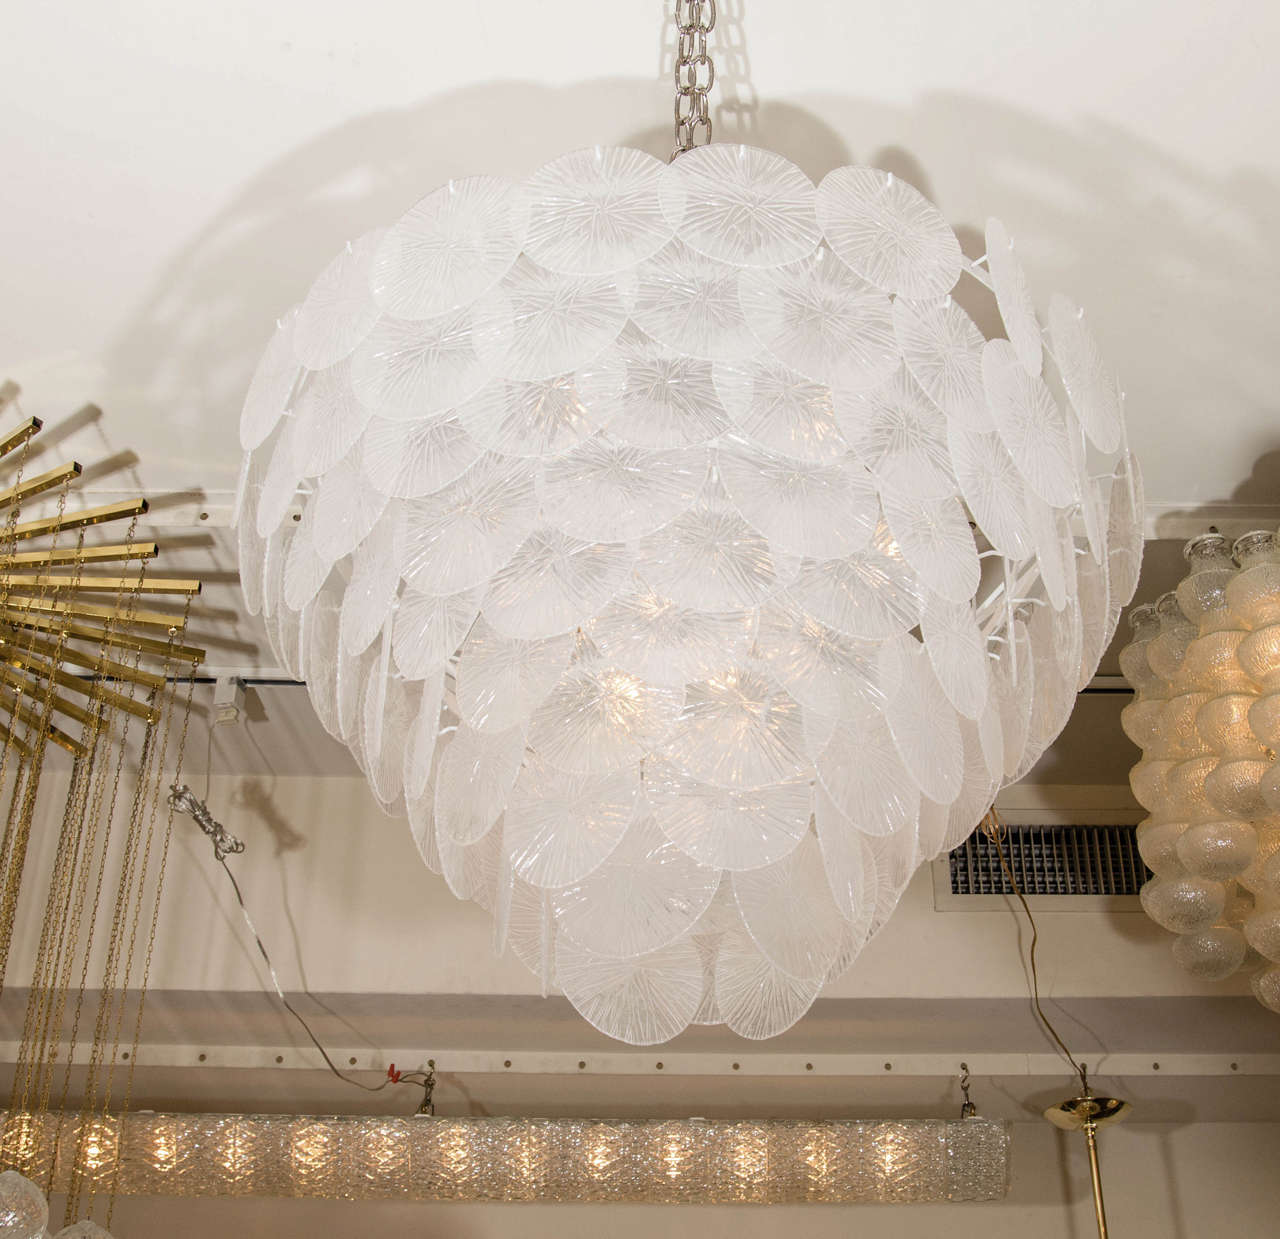 Multi-tiered chandelier composed of clear textured glass disks.